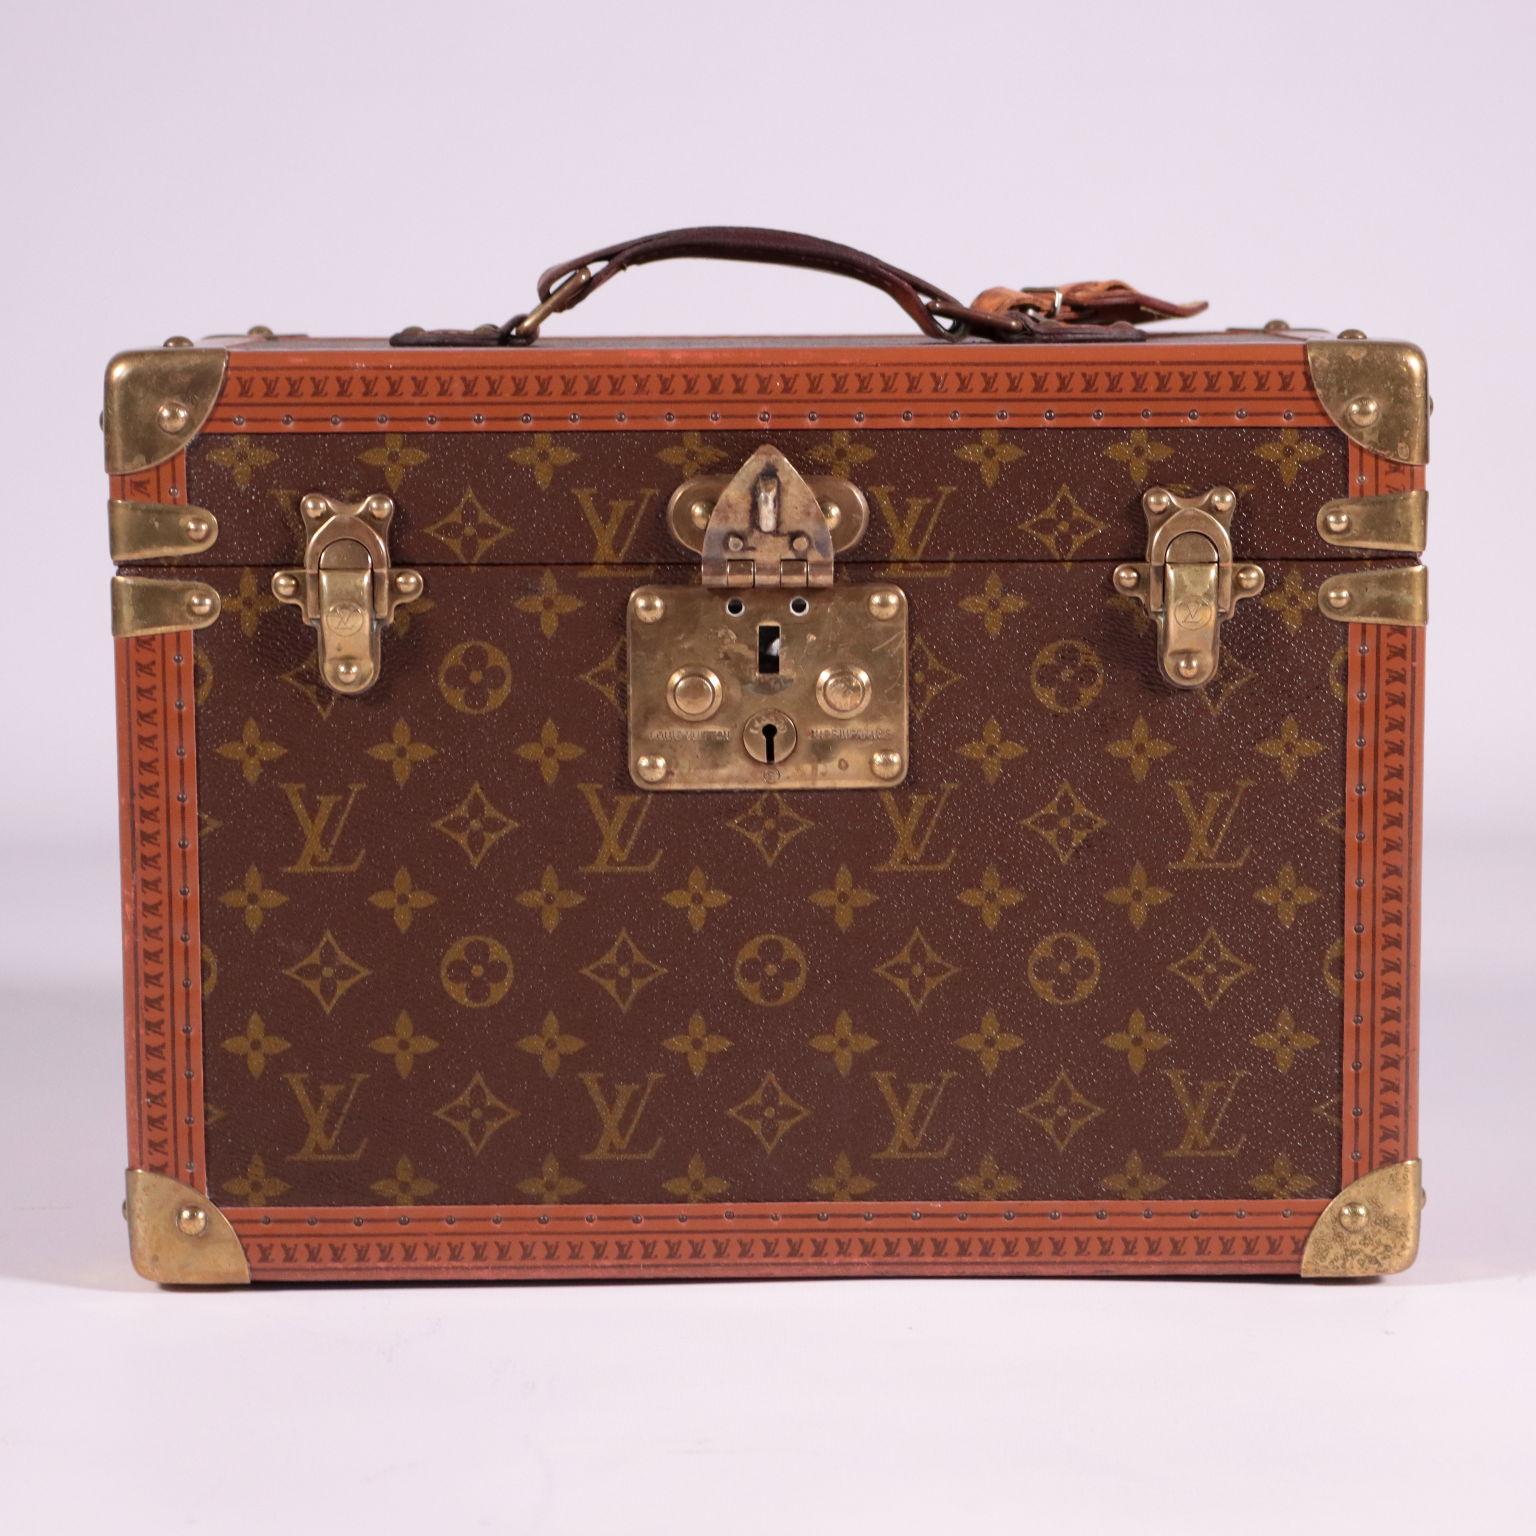 Louis Vuitton Monogram canvas beauty case (missing sticky tag),
1980s beat case. Well readable locking code: 143670.